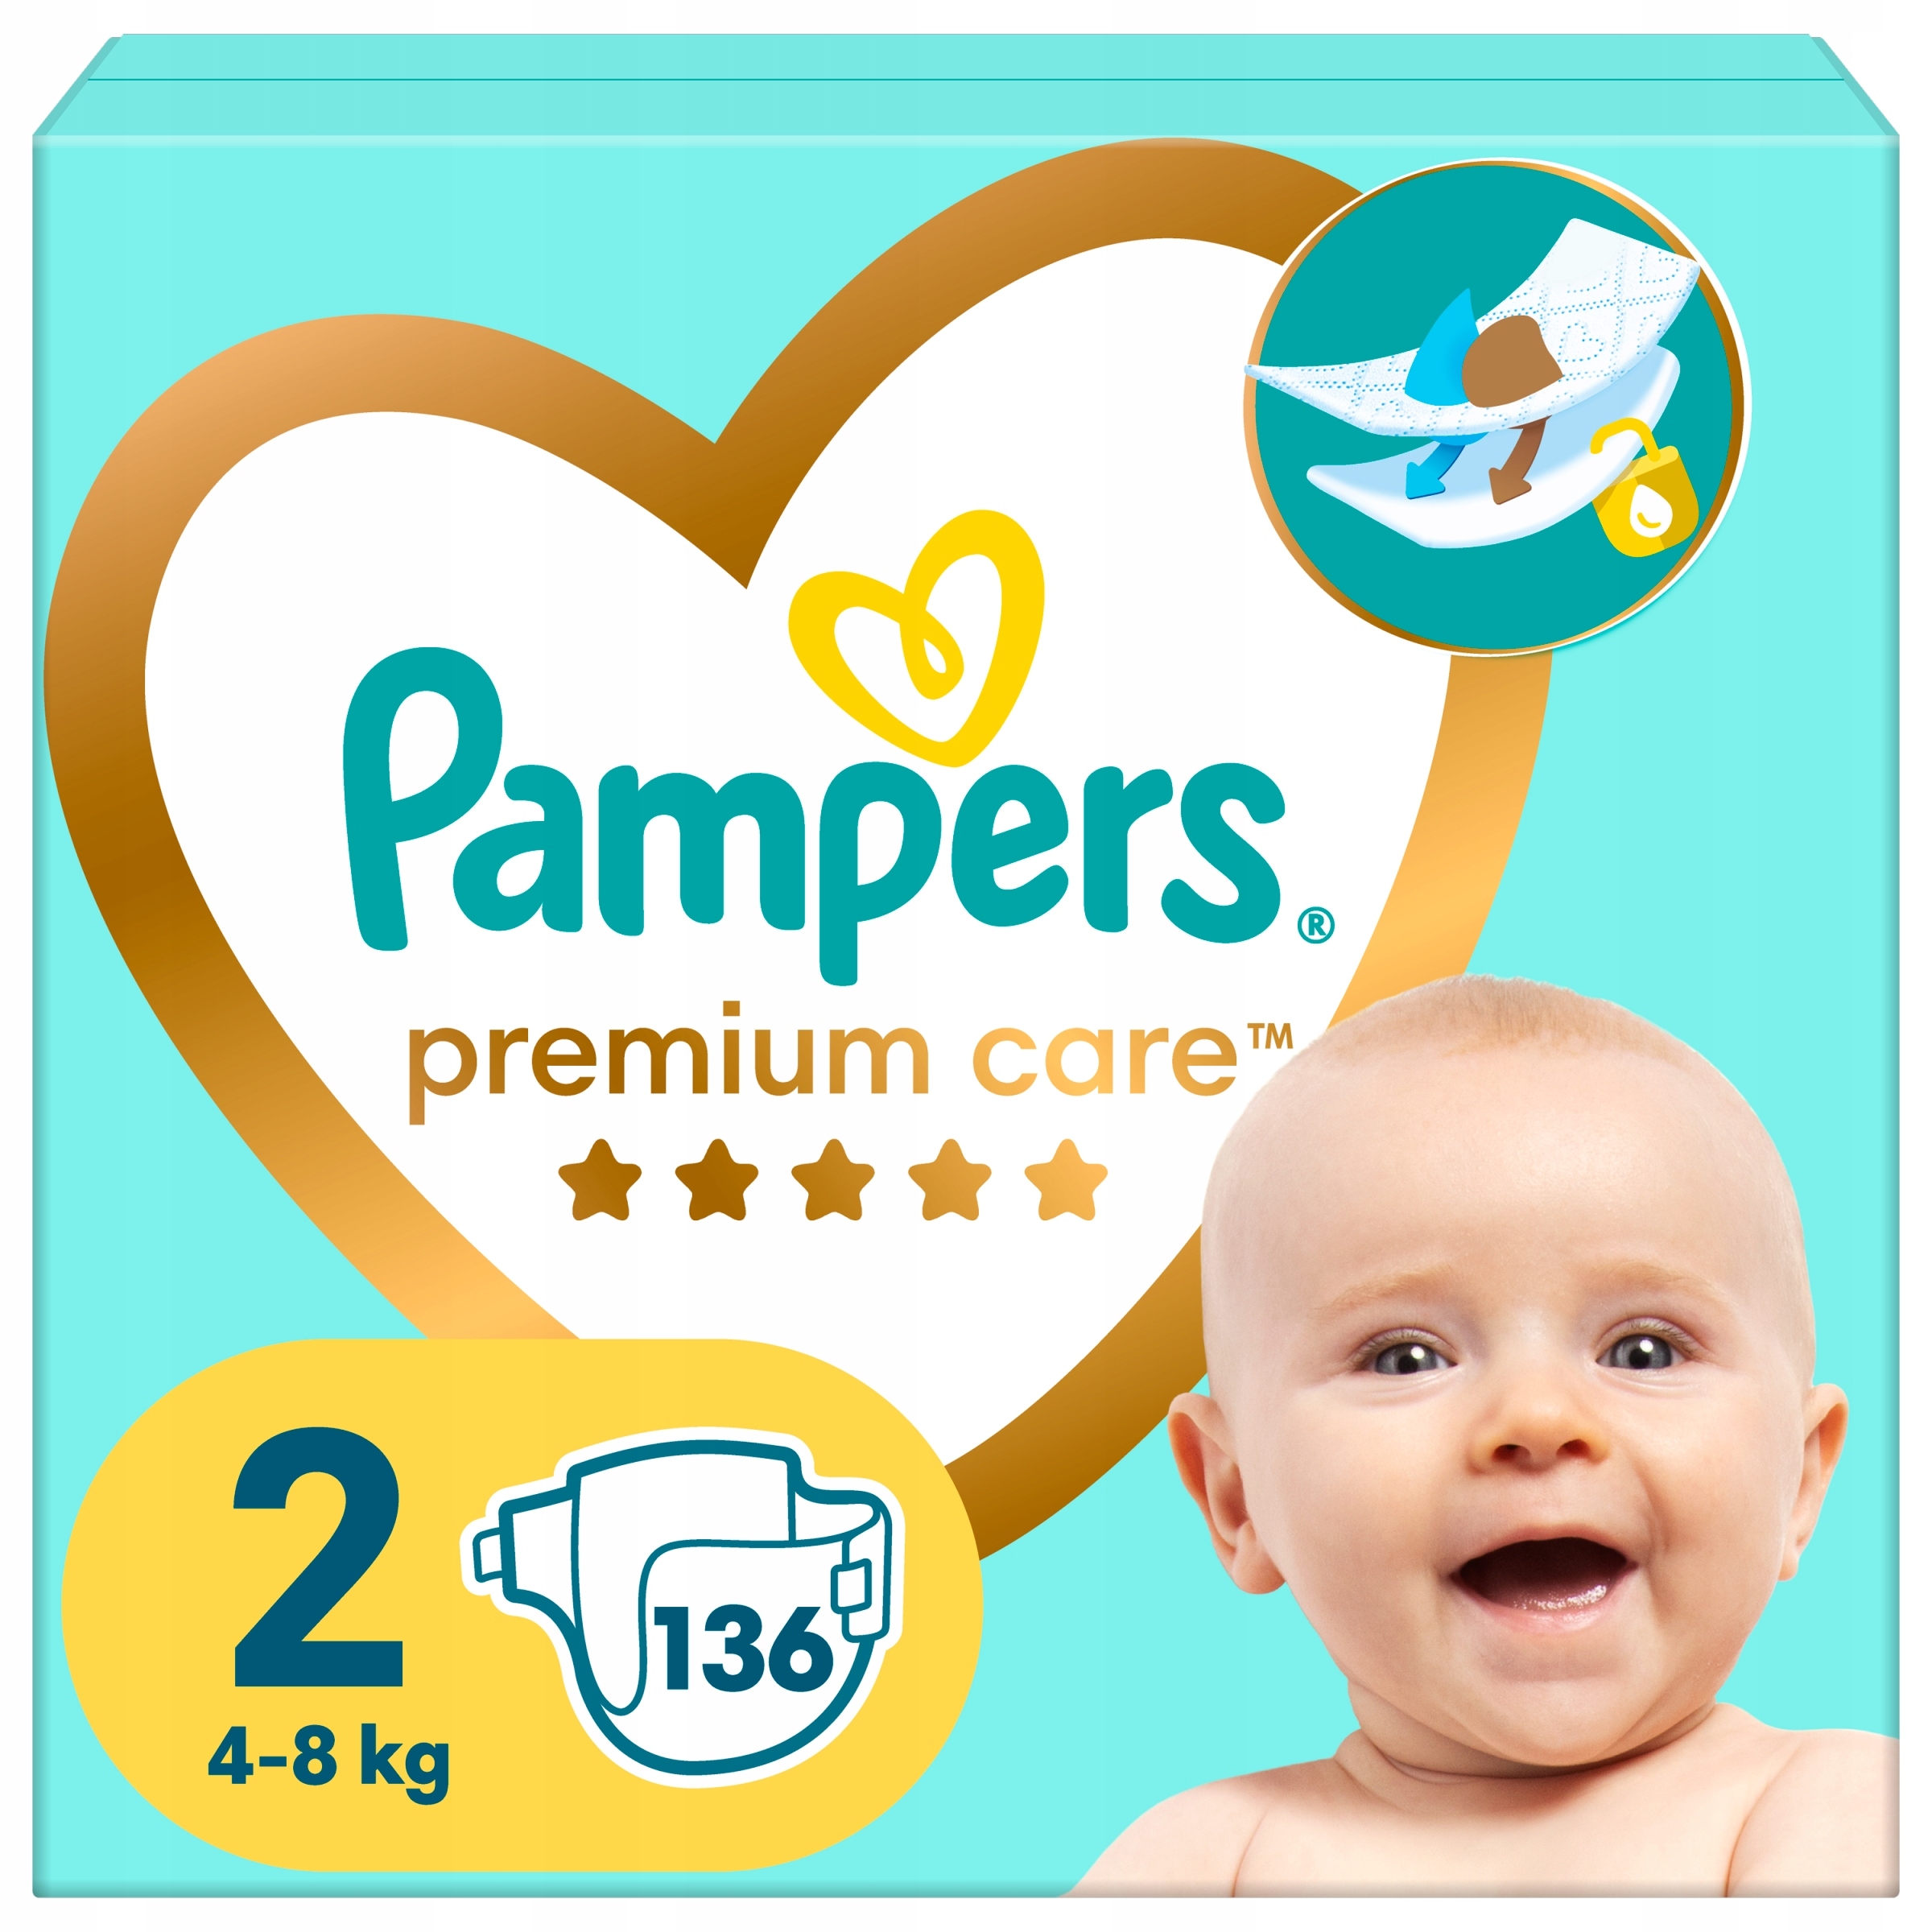 pampers 76n szt 2